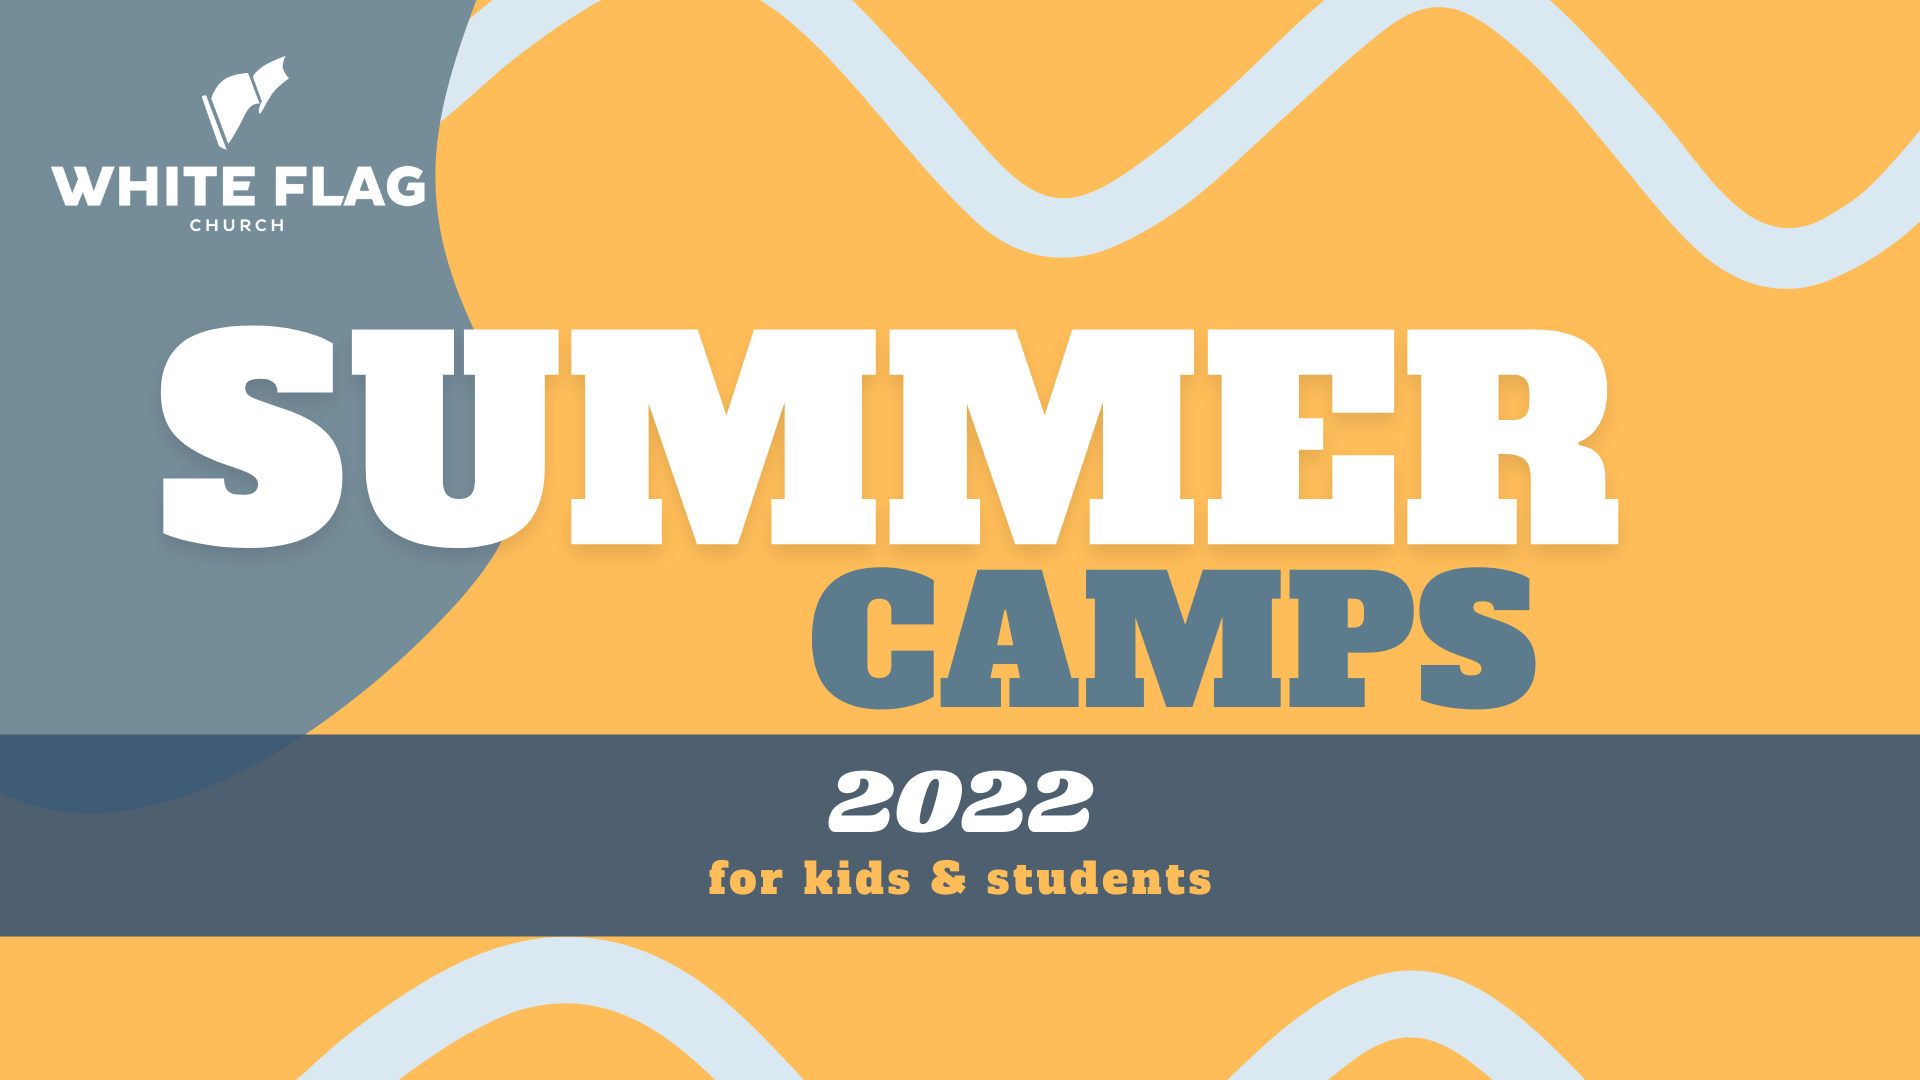 Summer Camps 202 1920x1080-2 image